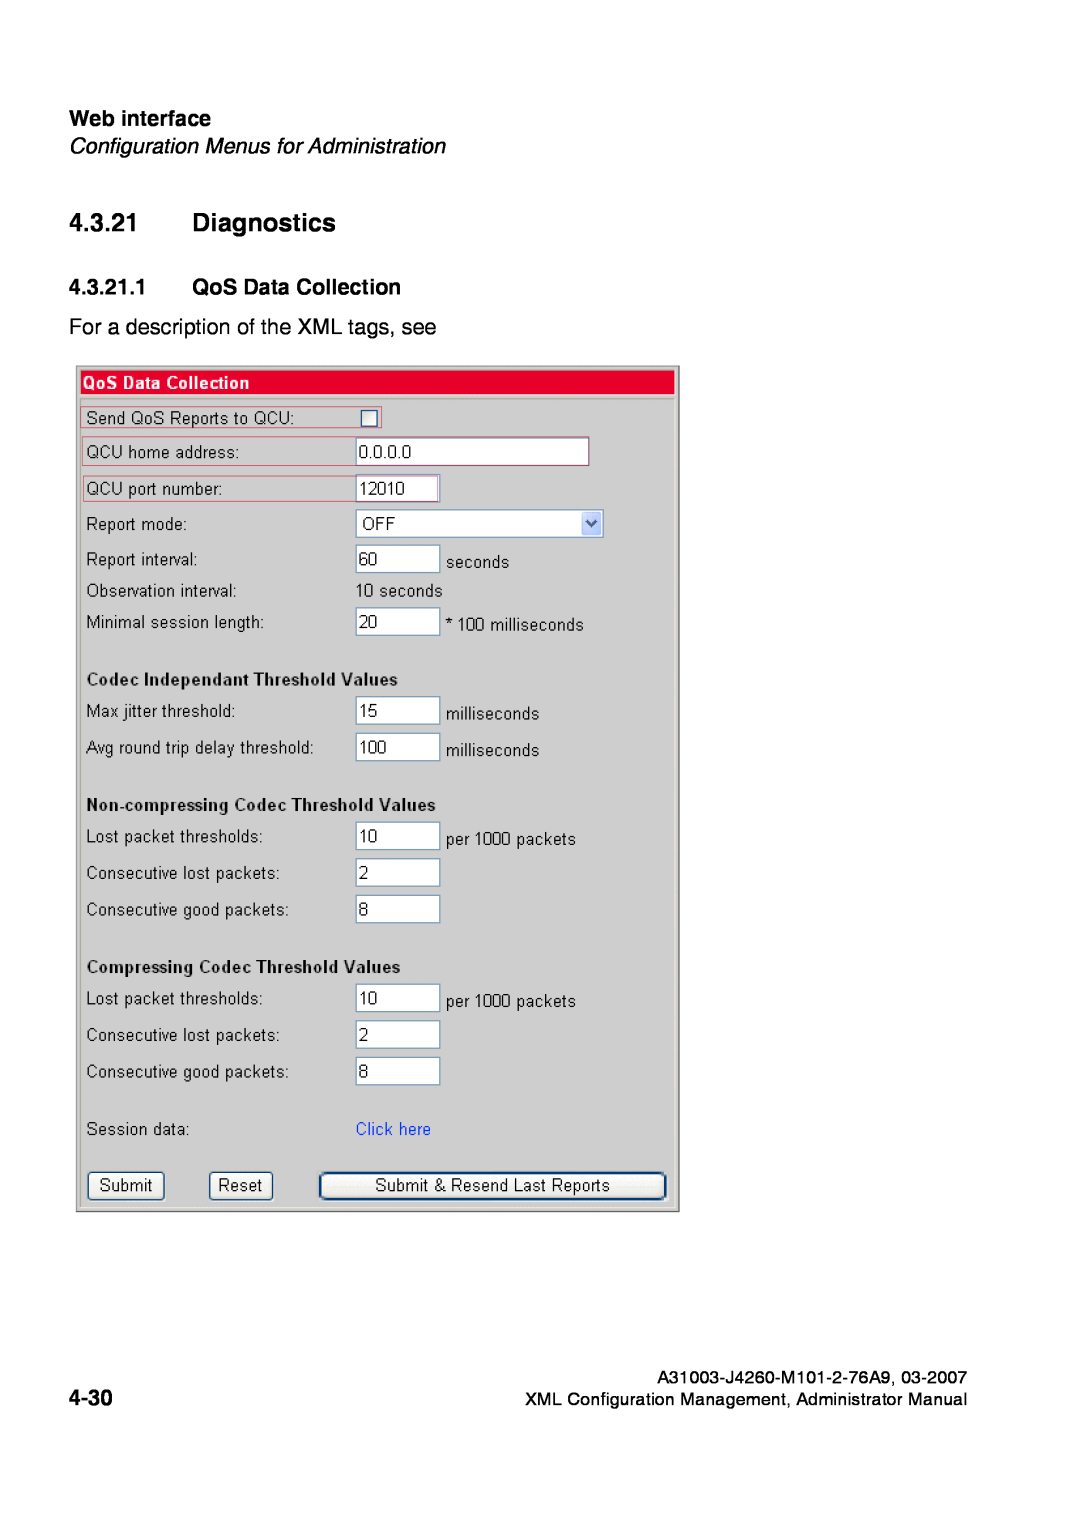 Siemens 420 S V6.0 manual Diagnostics, QoS Data Collection For a description of the XML tags, see, 4-30, Web interface 